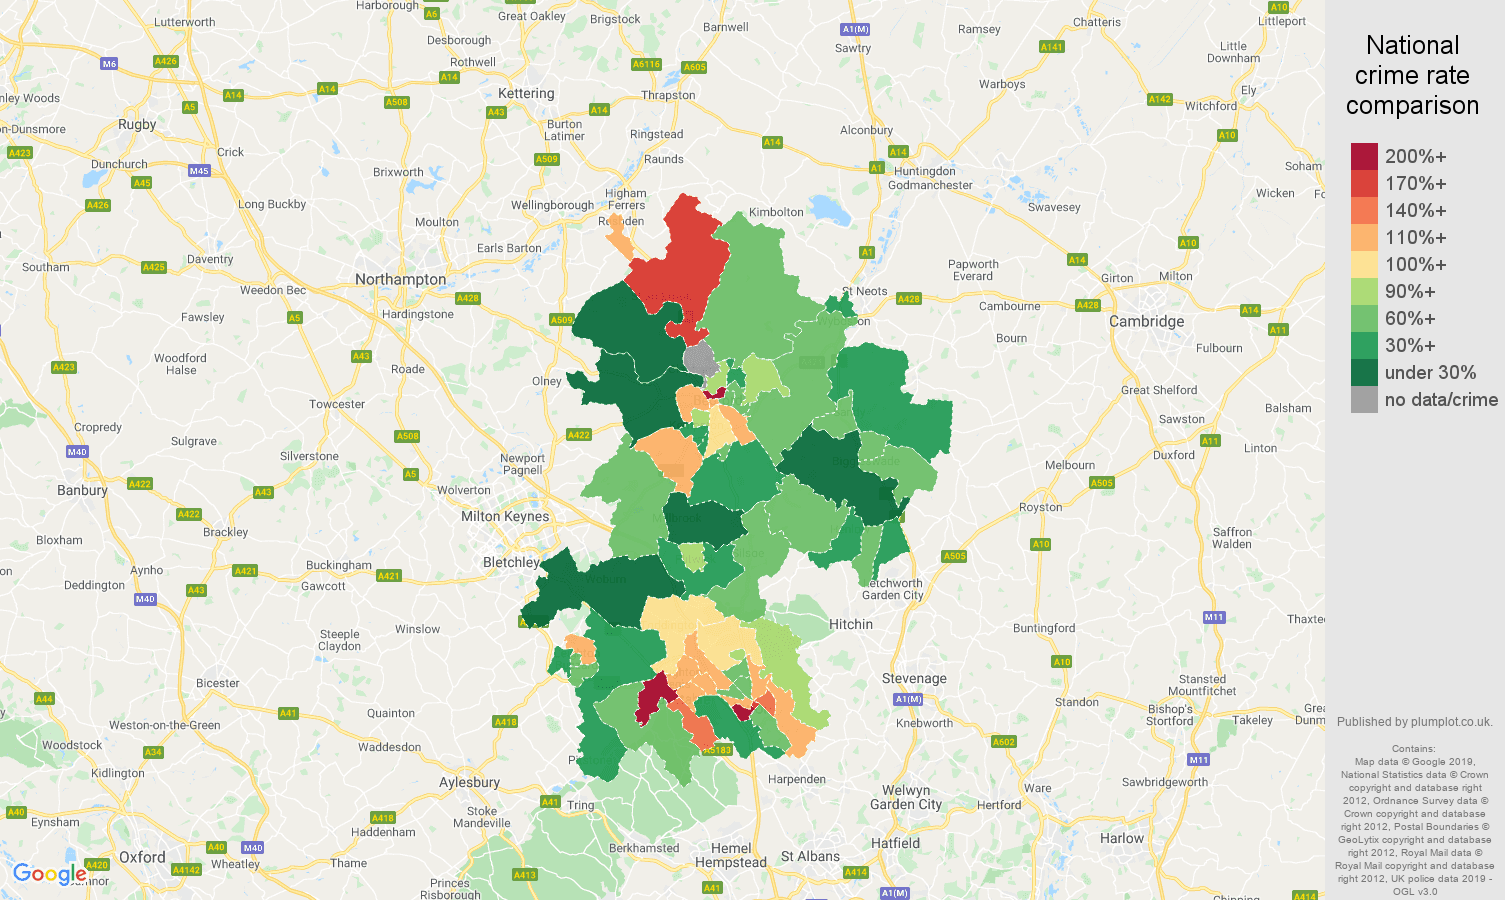 Bedfordshire other crime rate comparison map